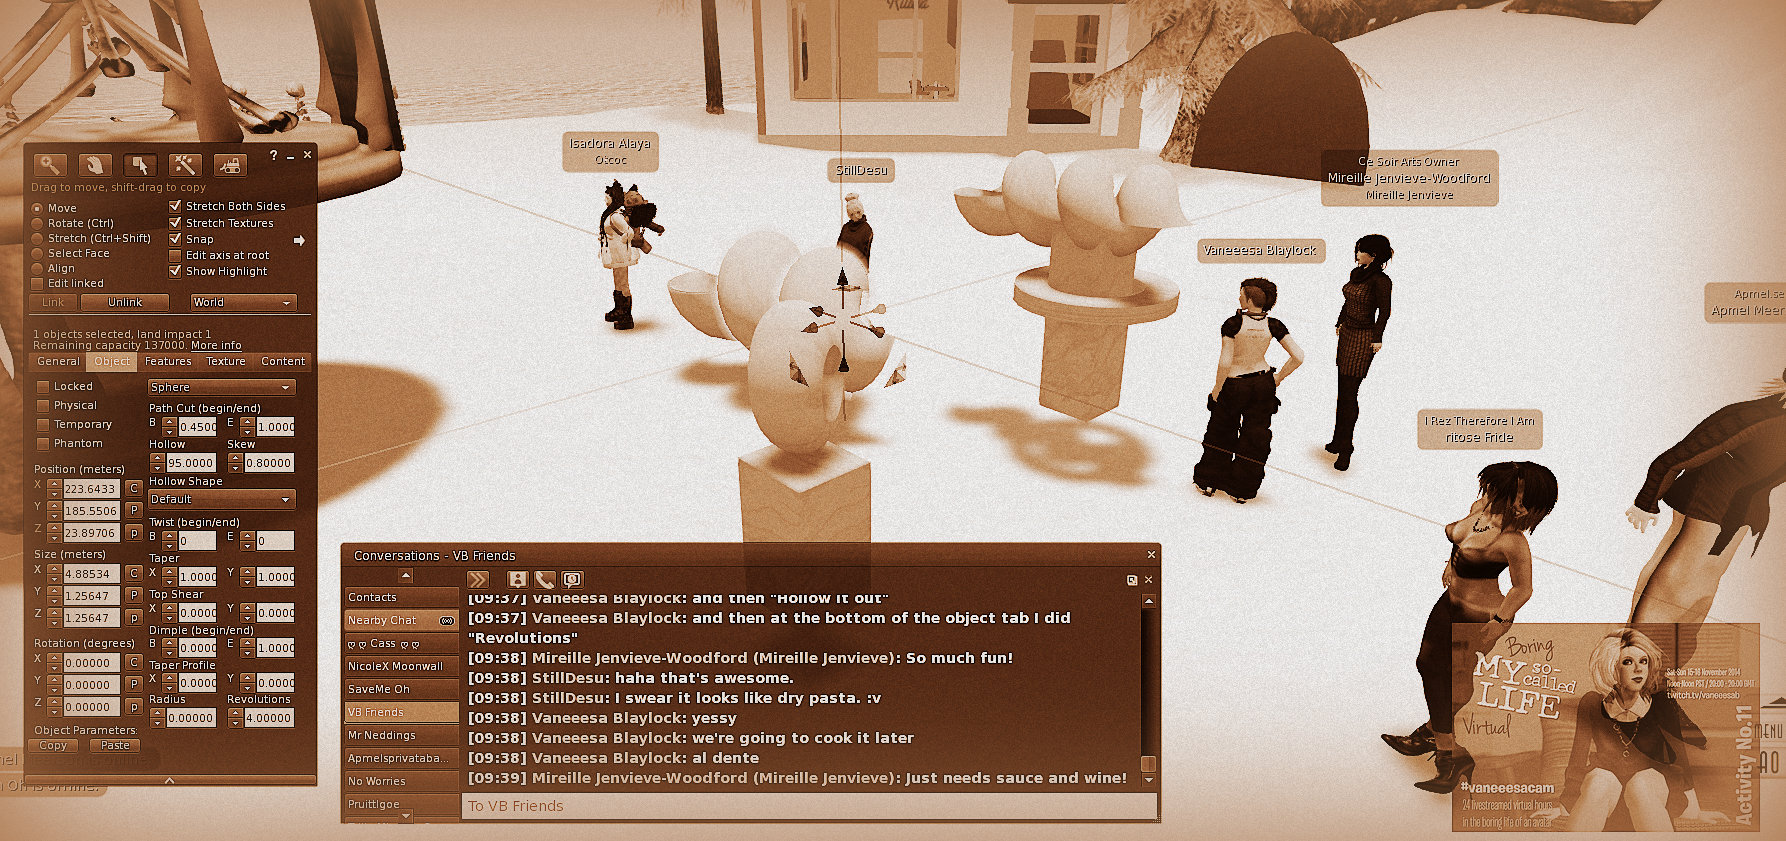 Screen Capture of Twitch.tv live avatar broadcast of 24-hour Vaneeesacam broadcast. In this image avatars are teaching a new user how to build in-world